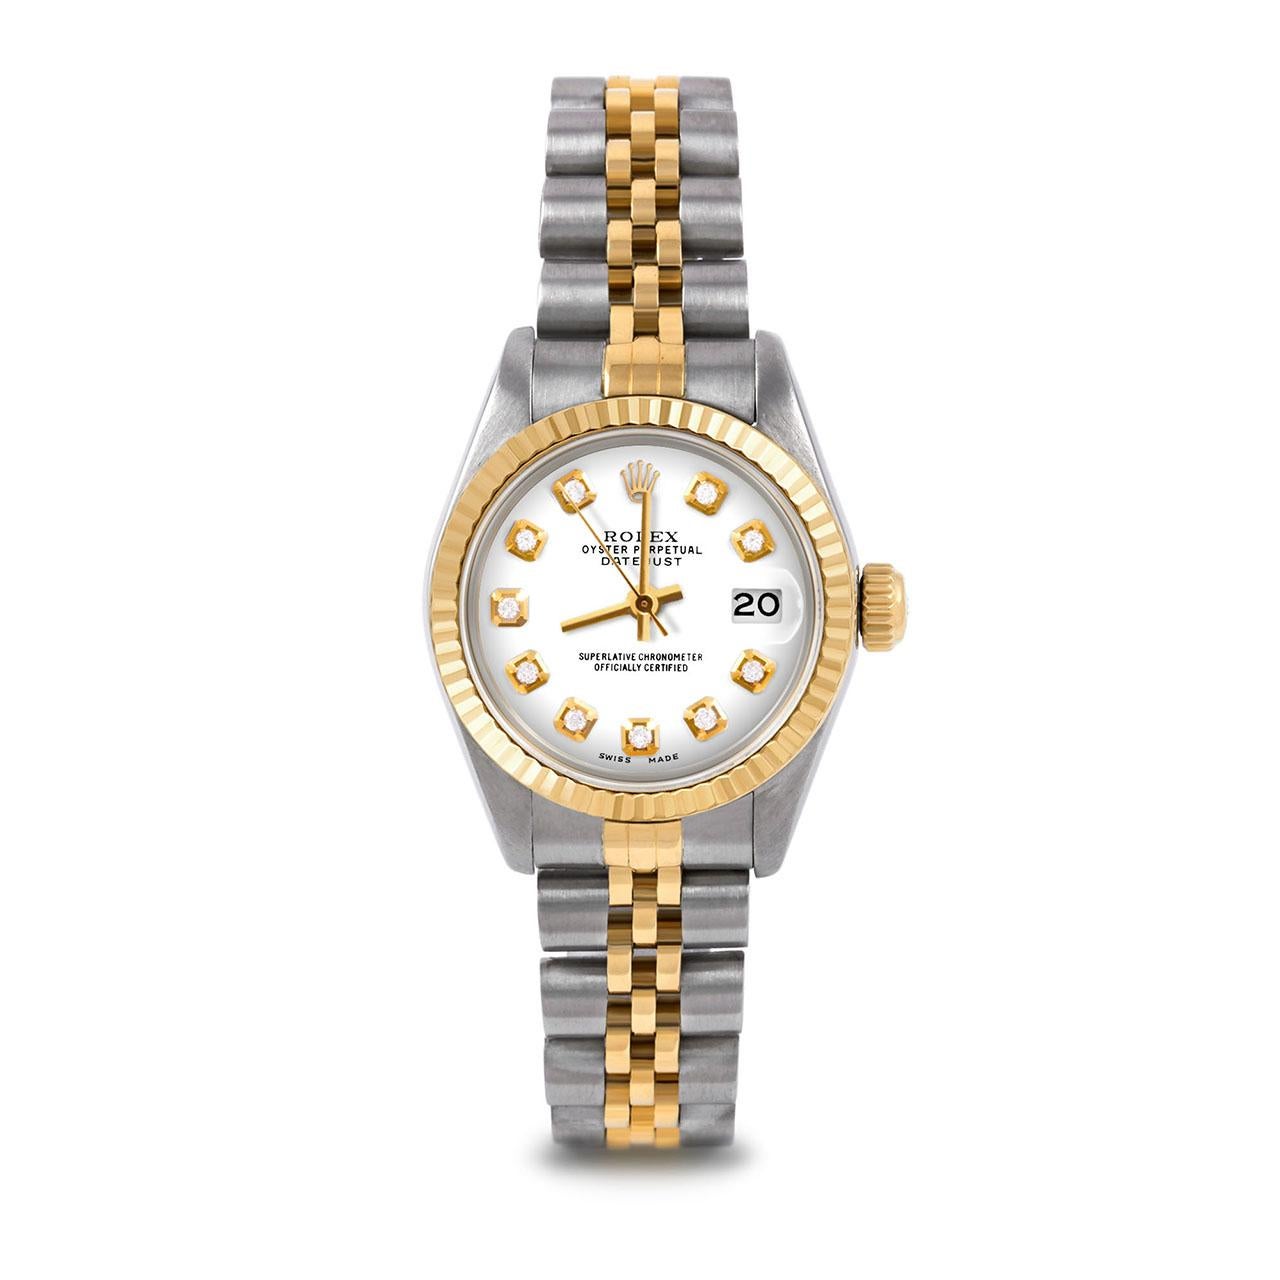 Pre-Owned Rolex 6917 Ladies 26mm Two Tone Datejust Watch, Custom White Diamond Dial & Fluted Bezel on Rolex 14K Yellow Gold And Stainless Steel Jubilee Band.   

SKU 6917-TT-WHT-DIA-AM-FLT-JBL


Brand/Model:        Rolex Datejust
Model Number:      